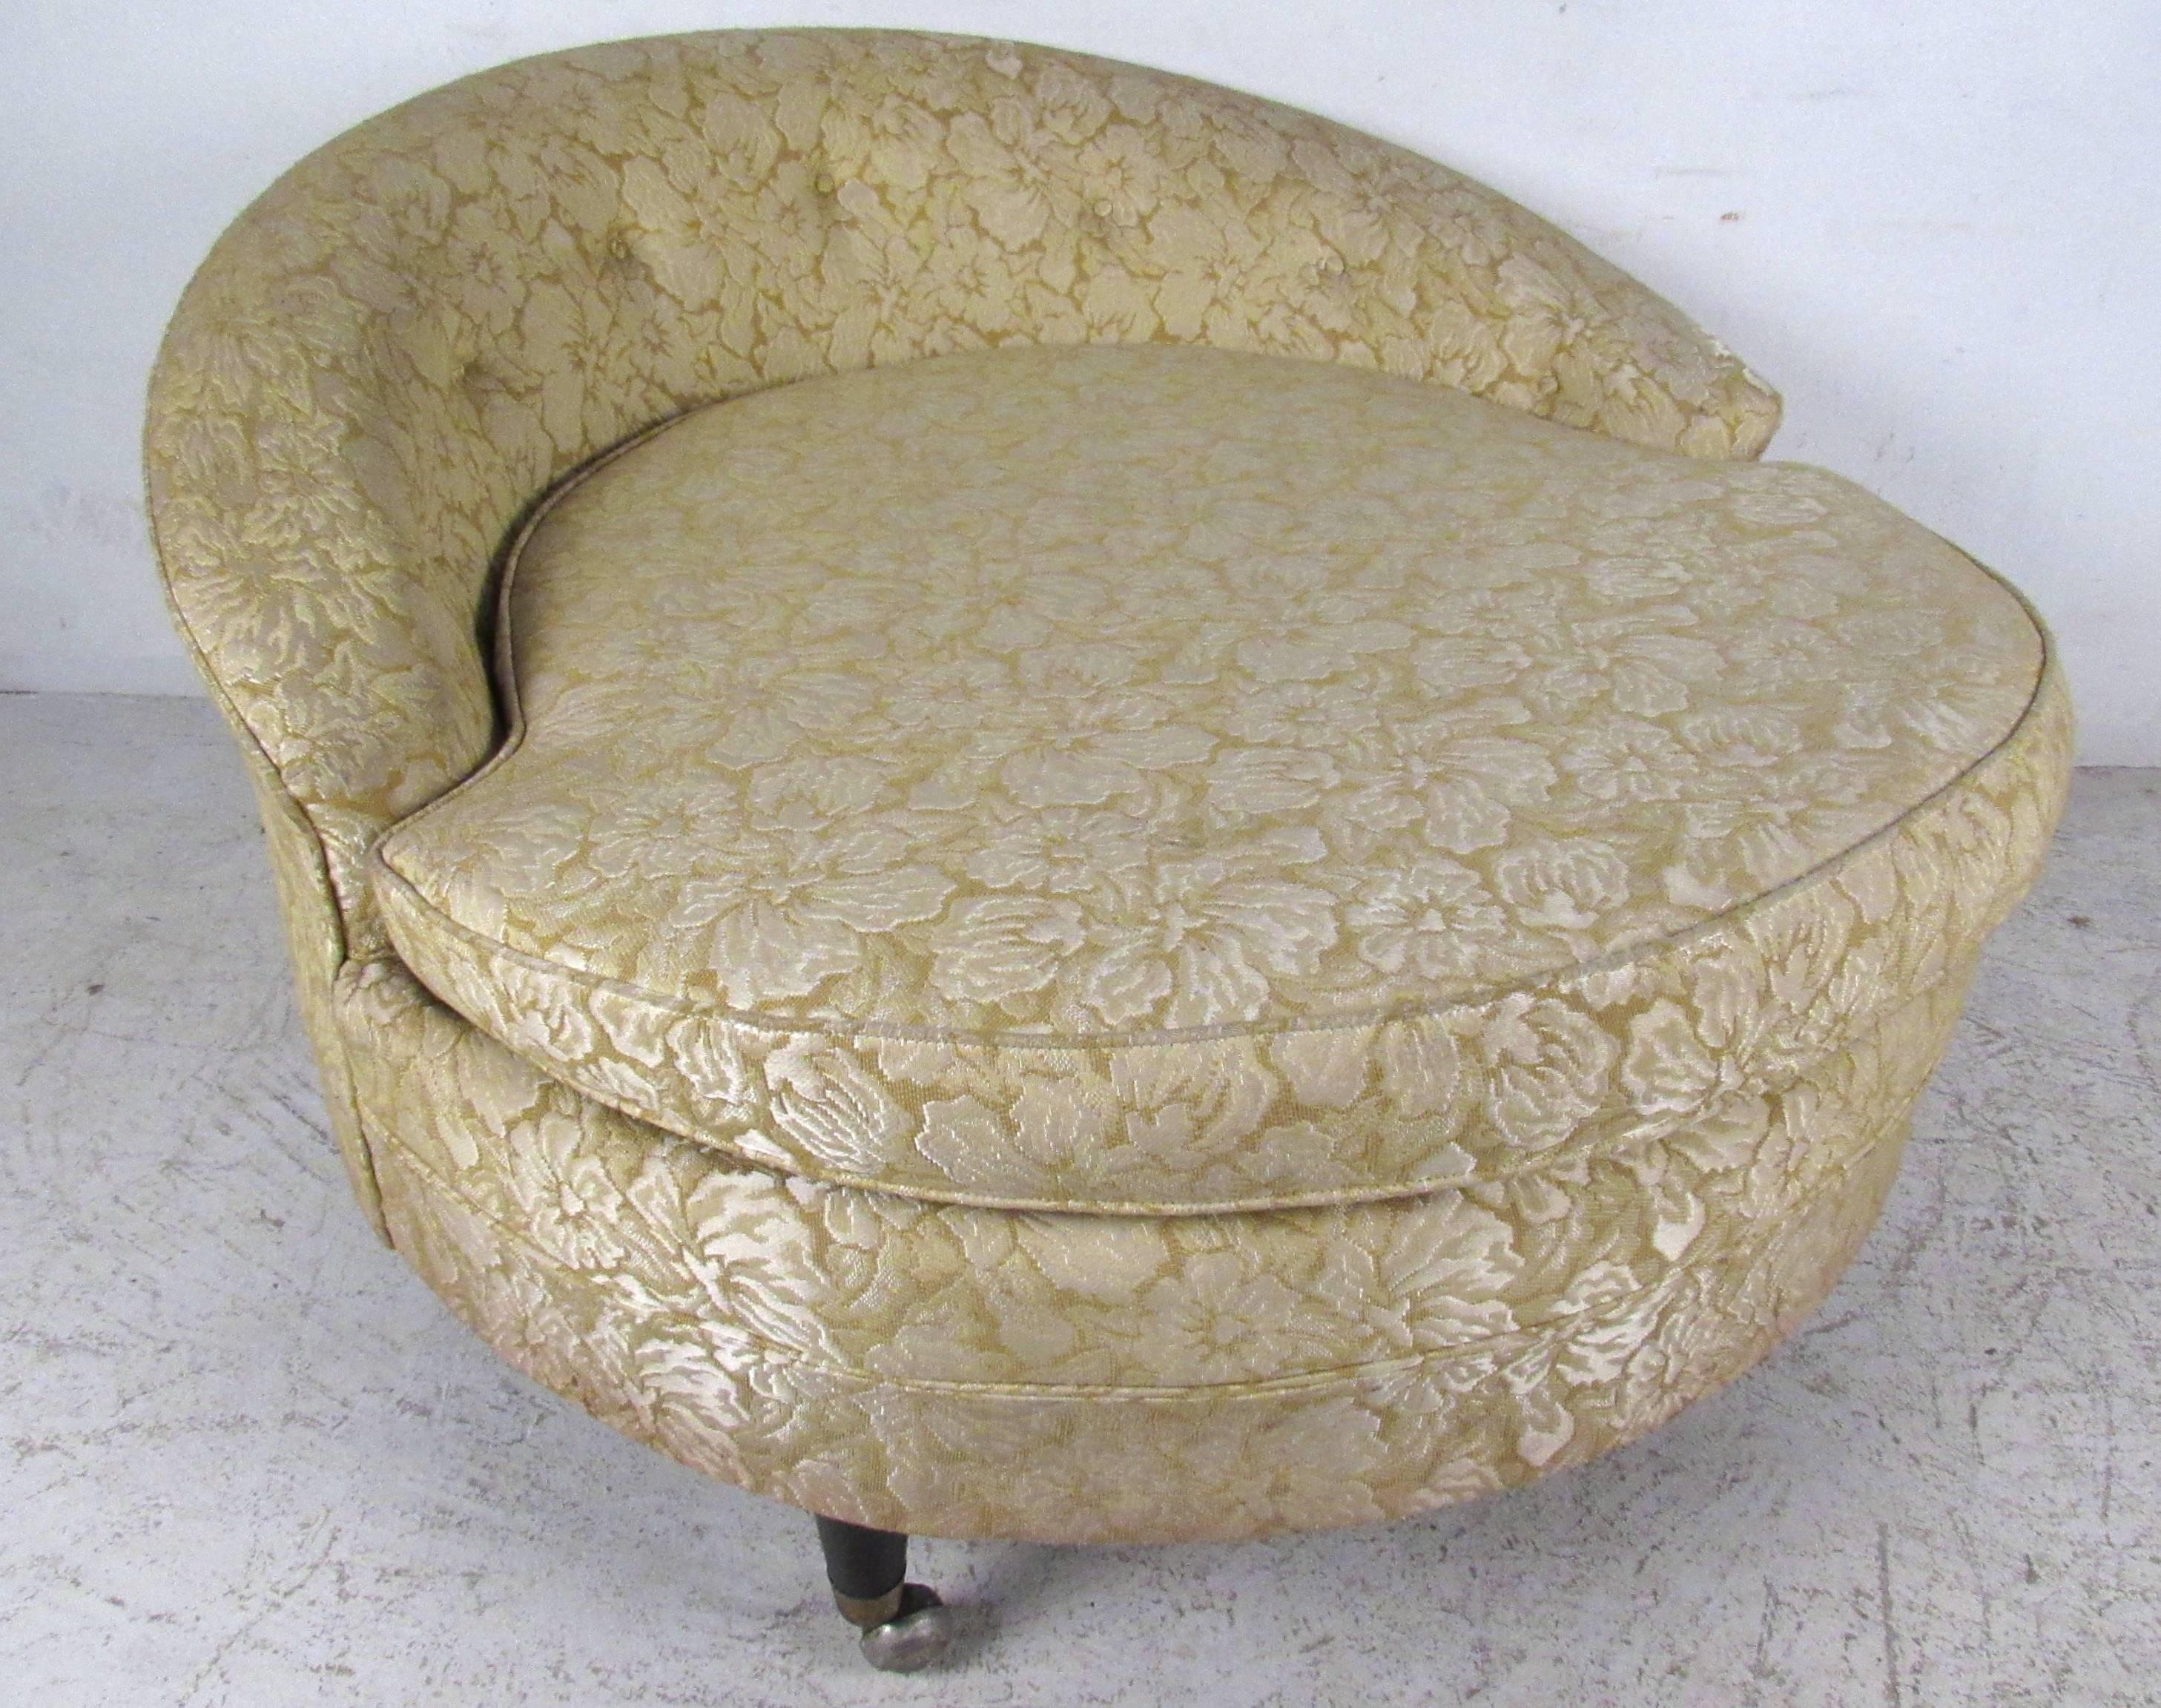 This pair of rolling lounge chairs in the style of Adrian Pearsall make a unique and eye-catching seating addition to a variety of interiors. Unique sculpted backs, tufted fabric, and casters for easy arrangement add to the charm of the pair. Please